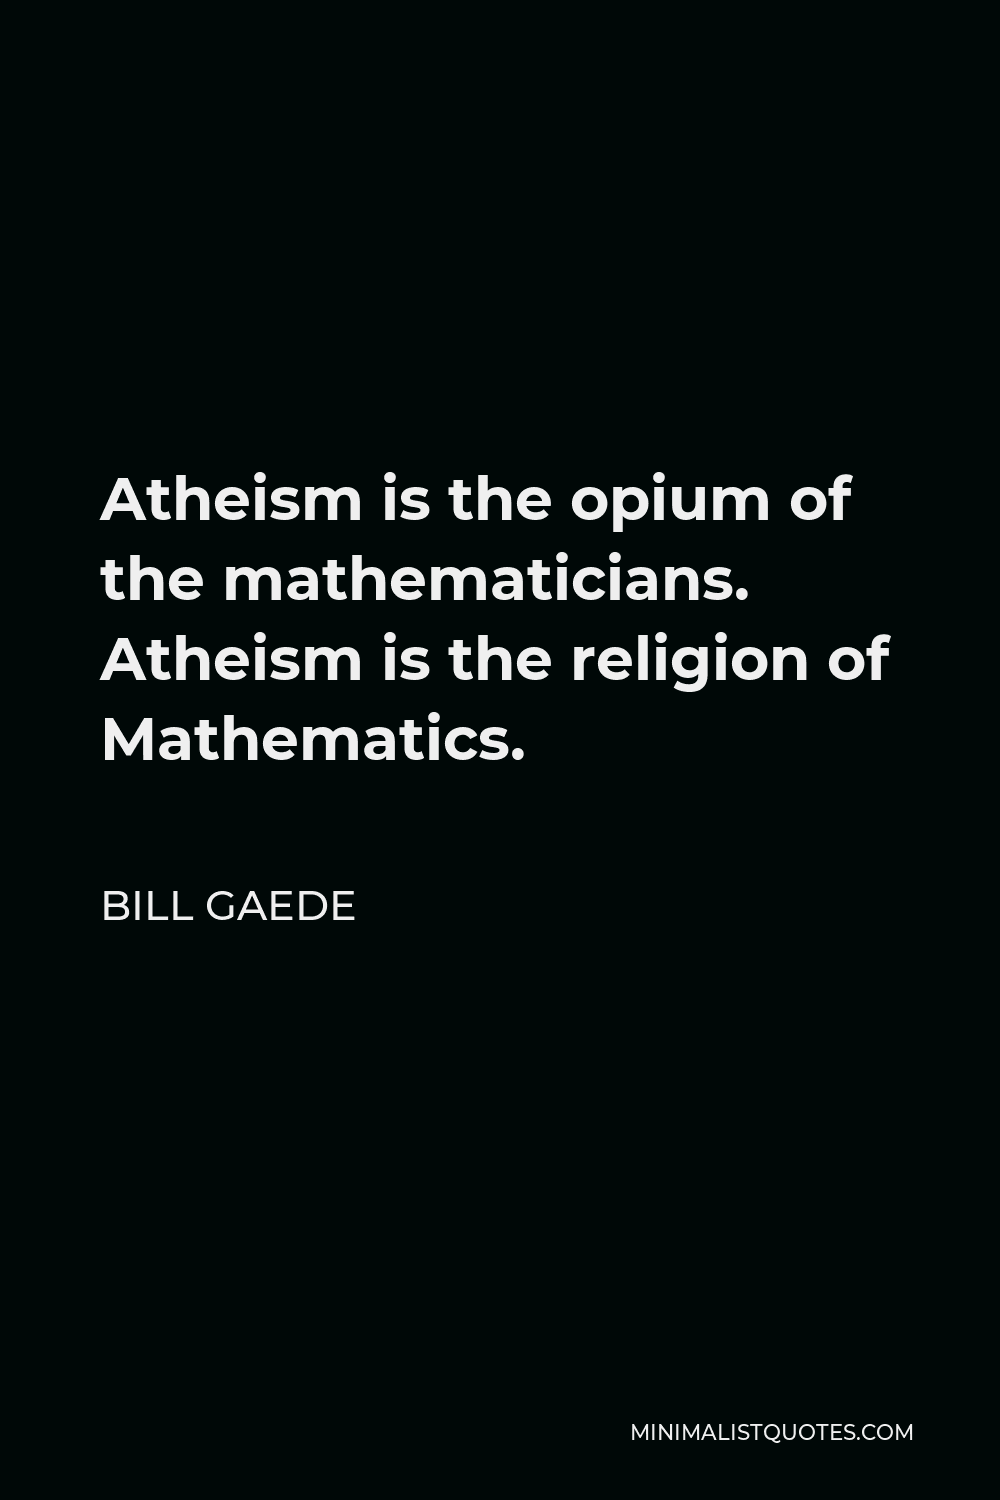 Bill Gaede Quote - Atheism is the opium of the mathematicians. Atheism is the religion of Mathematics.